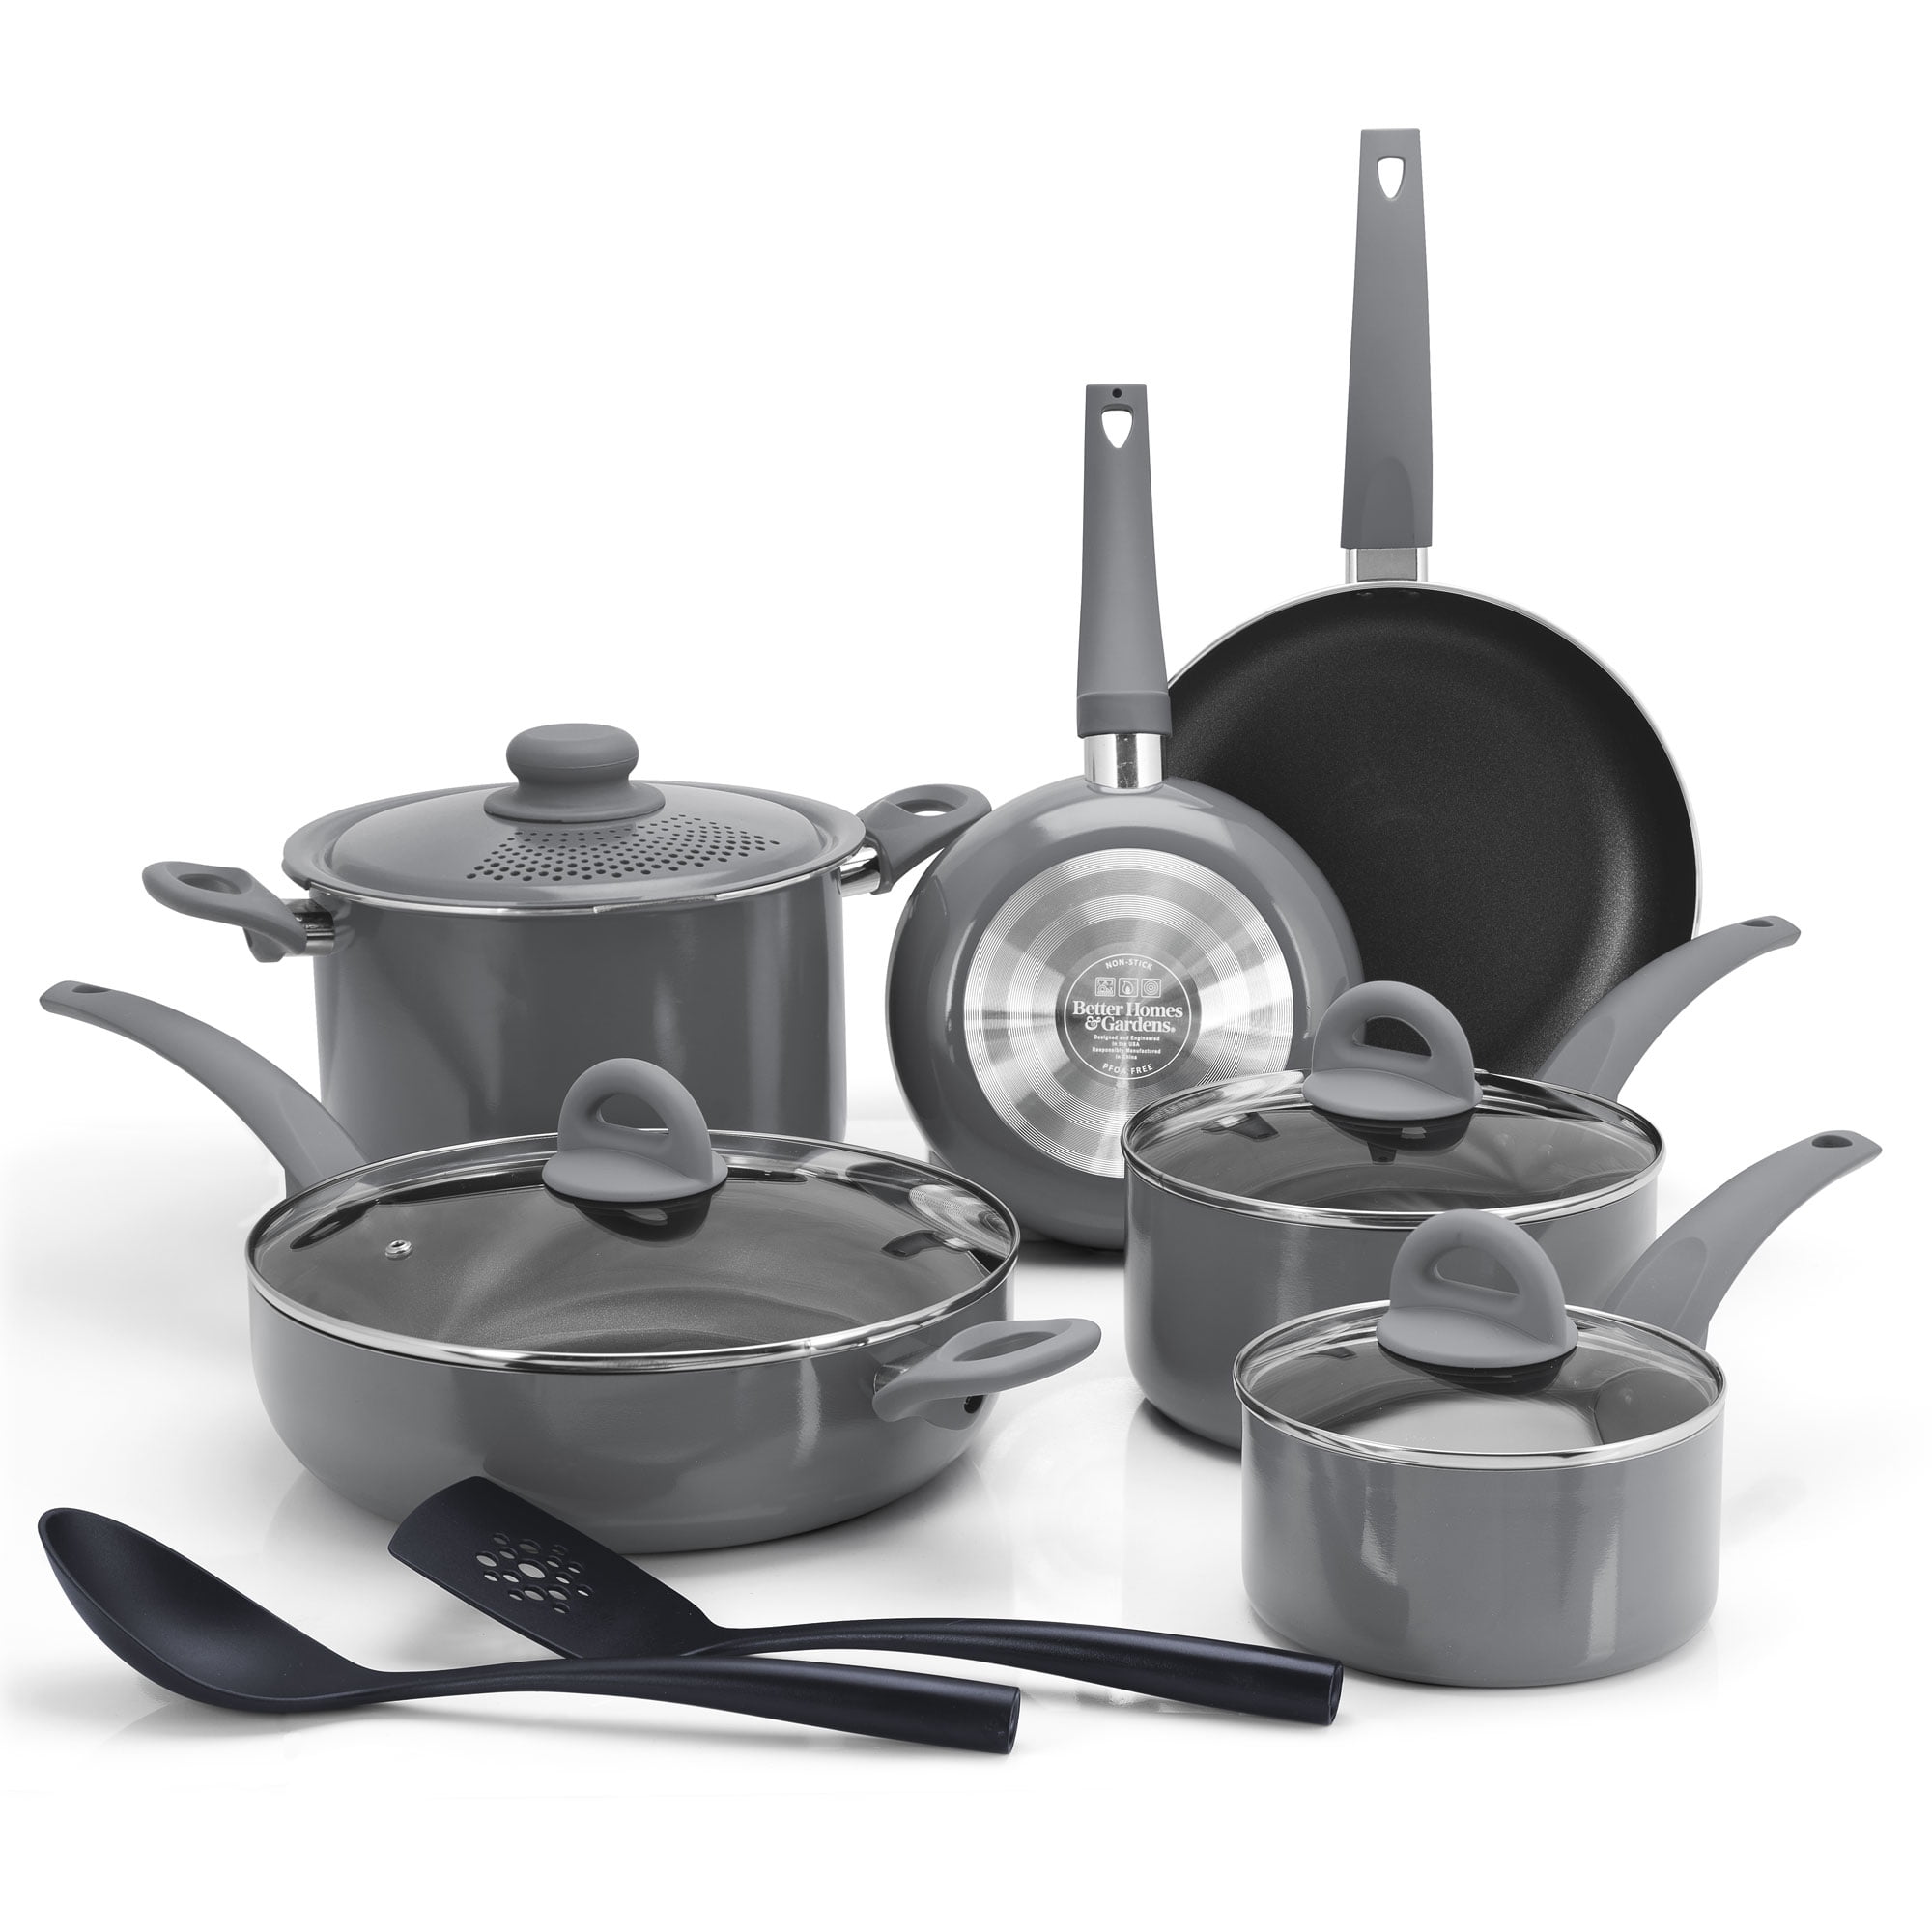 12pc Stainless Steel Cookware Set With Non-stick Coated Fry Pan